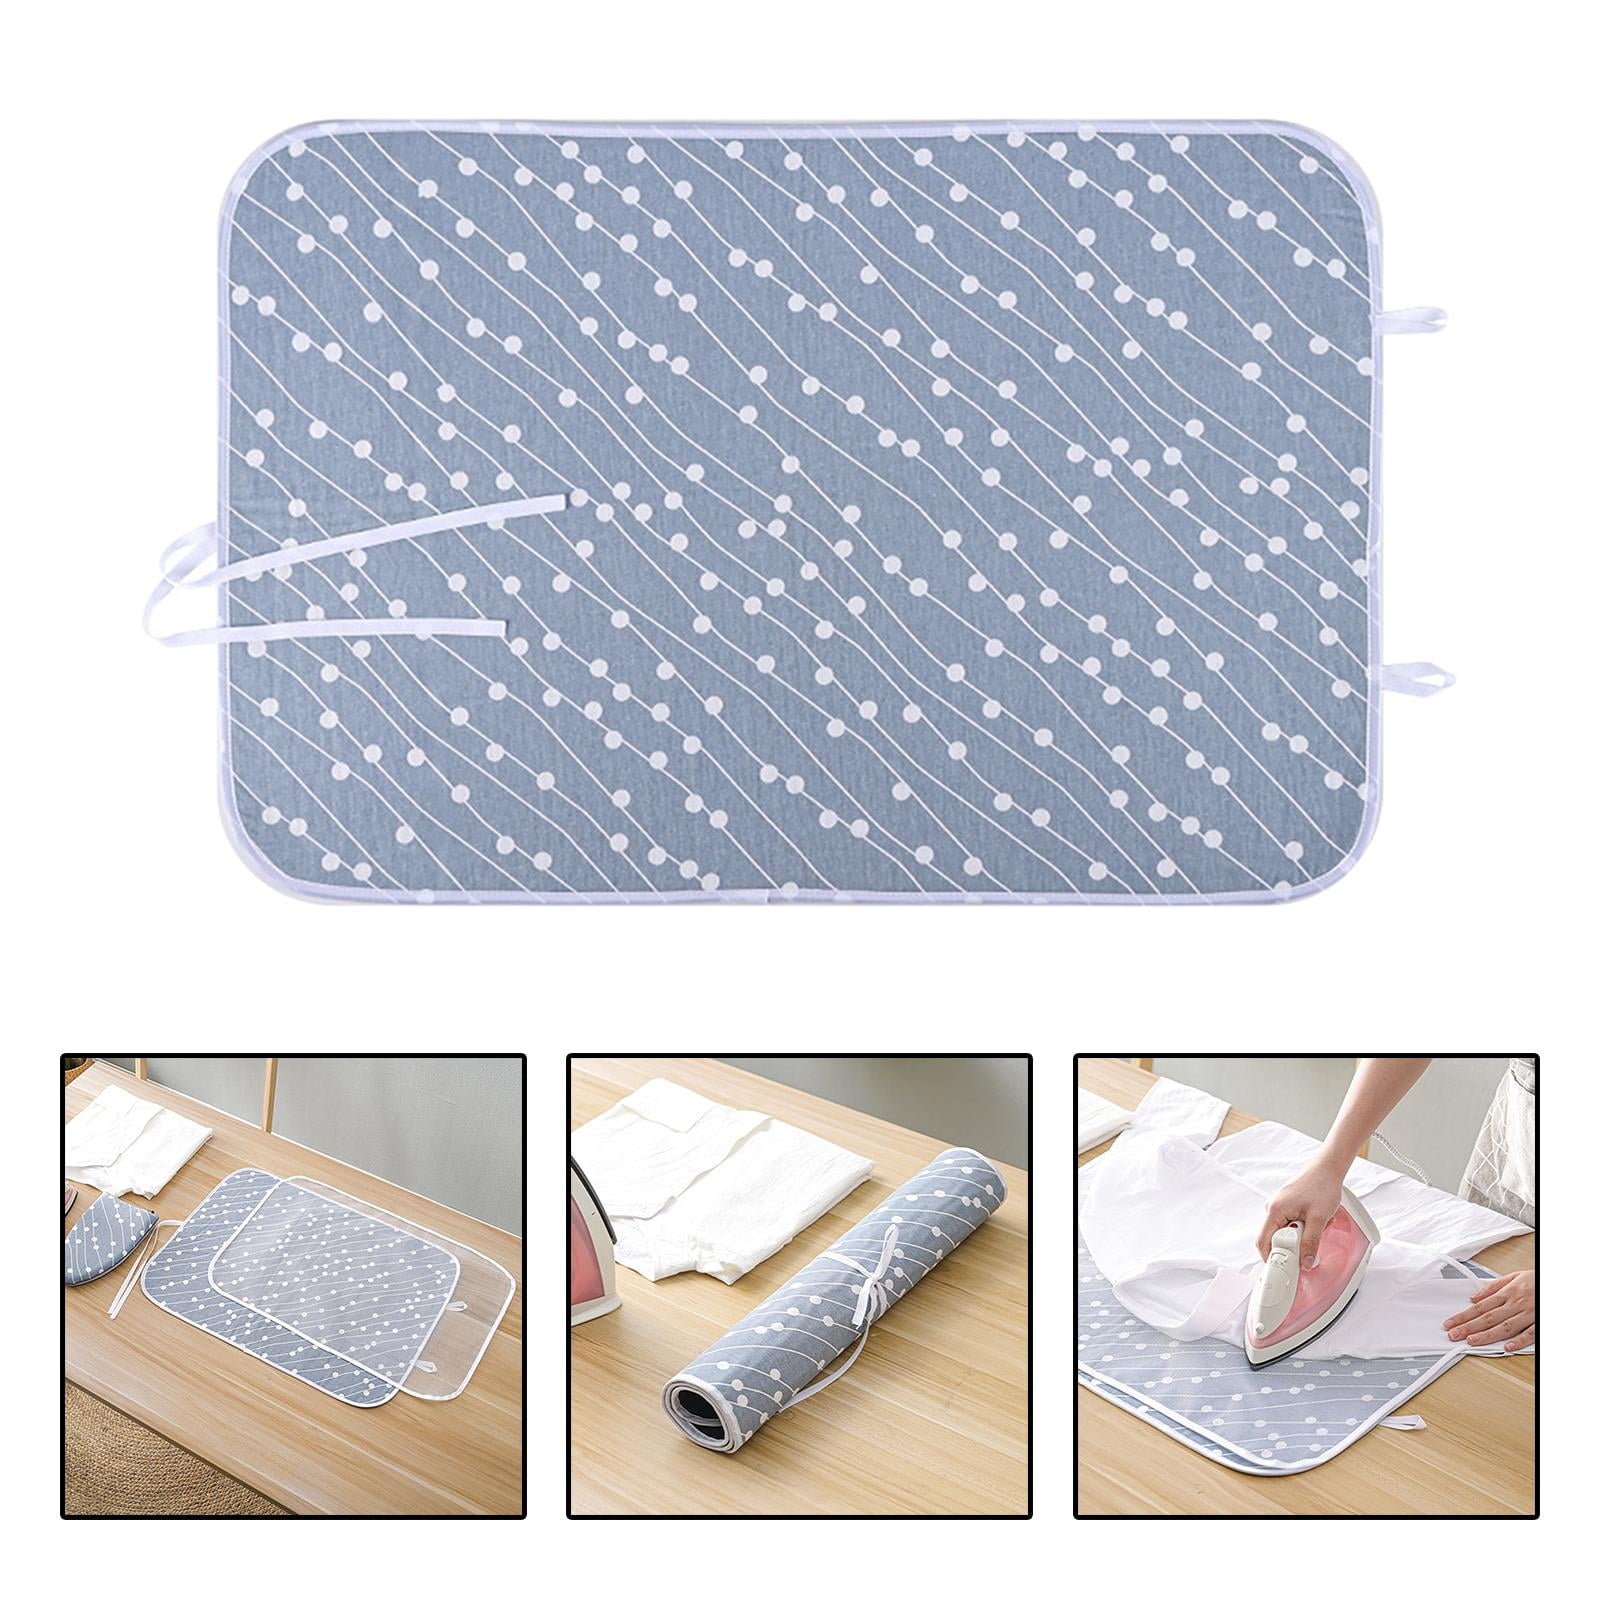 Portable Foldable Ironing Pad Mat 20x25 Inches Grey Heat Resistant